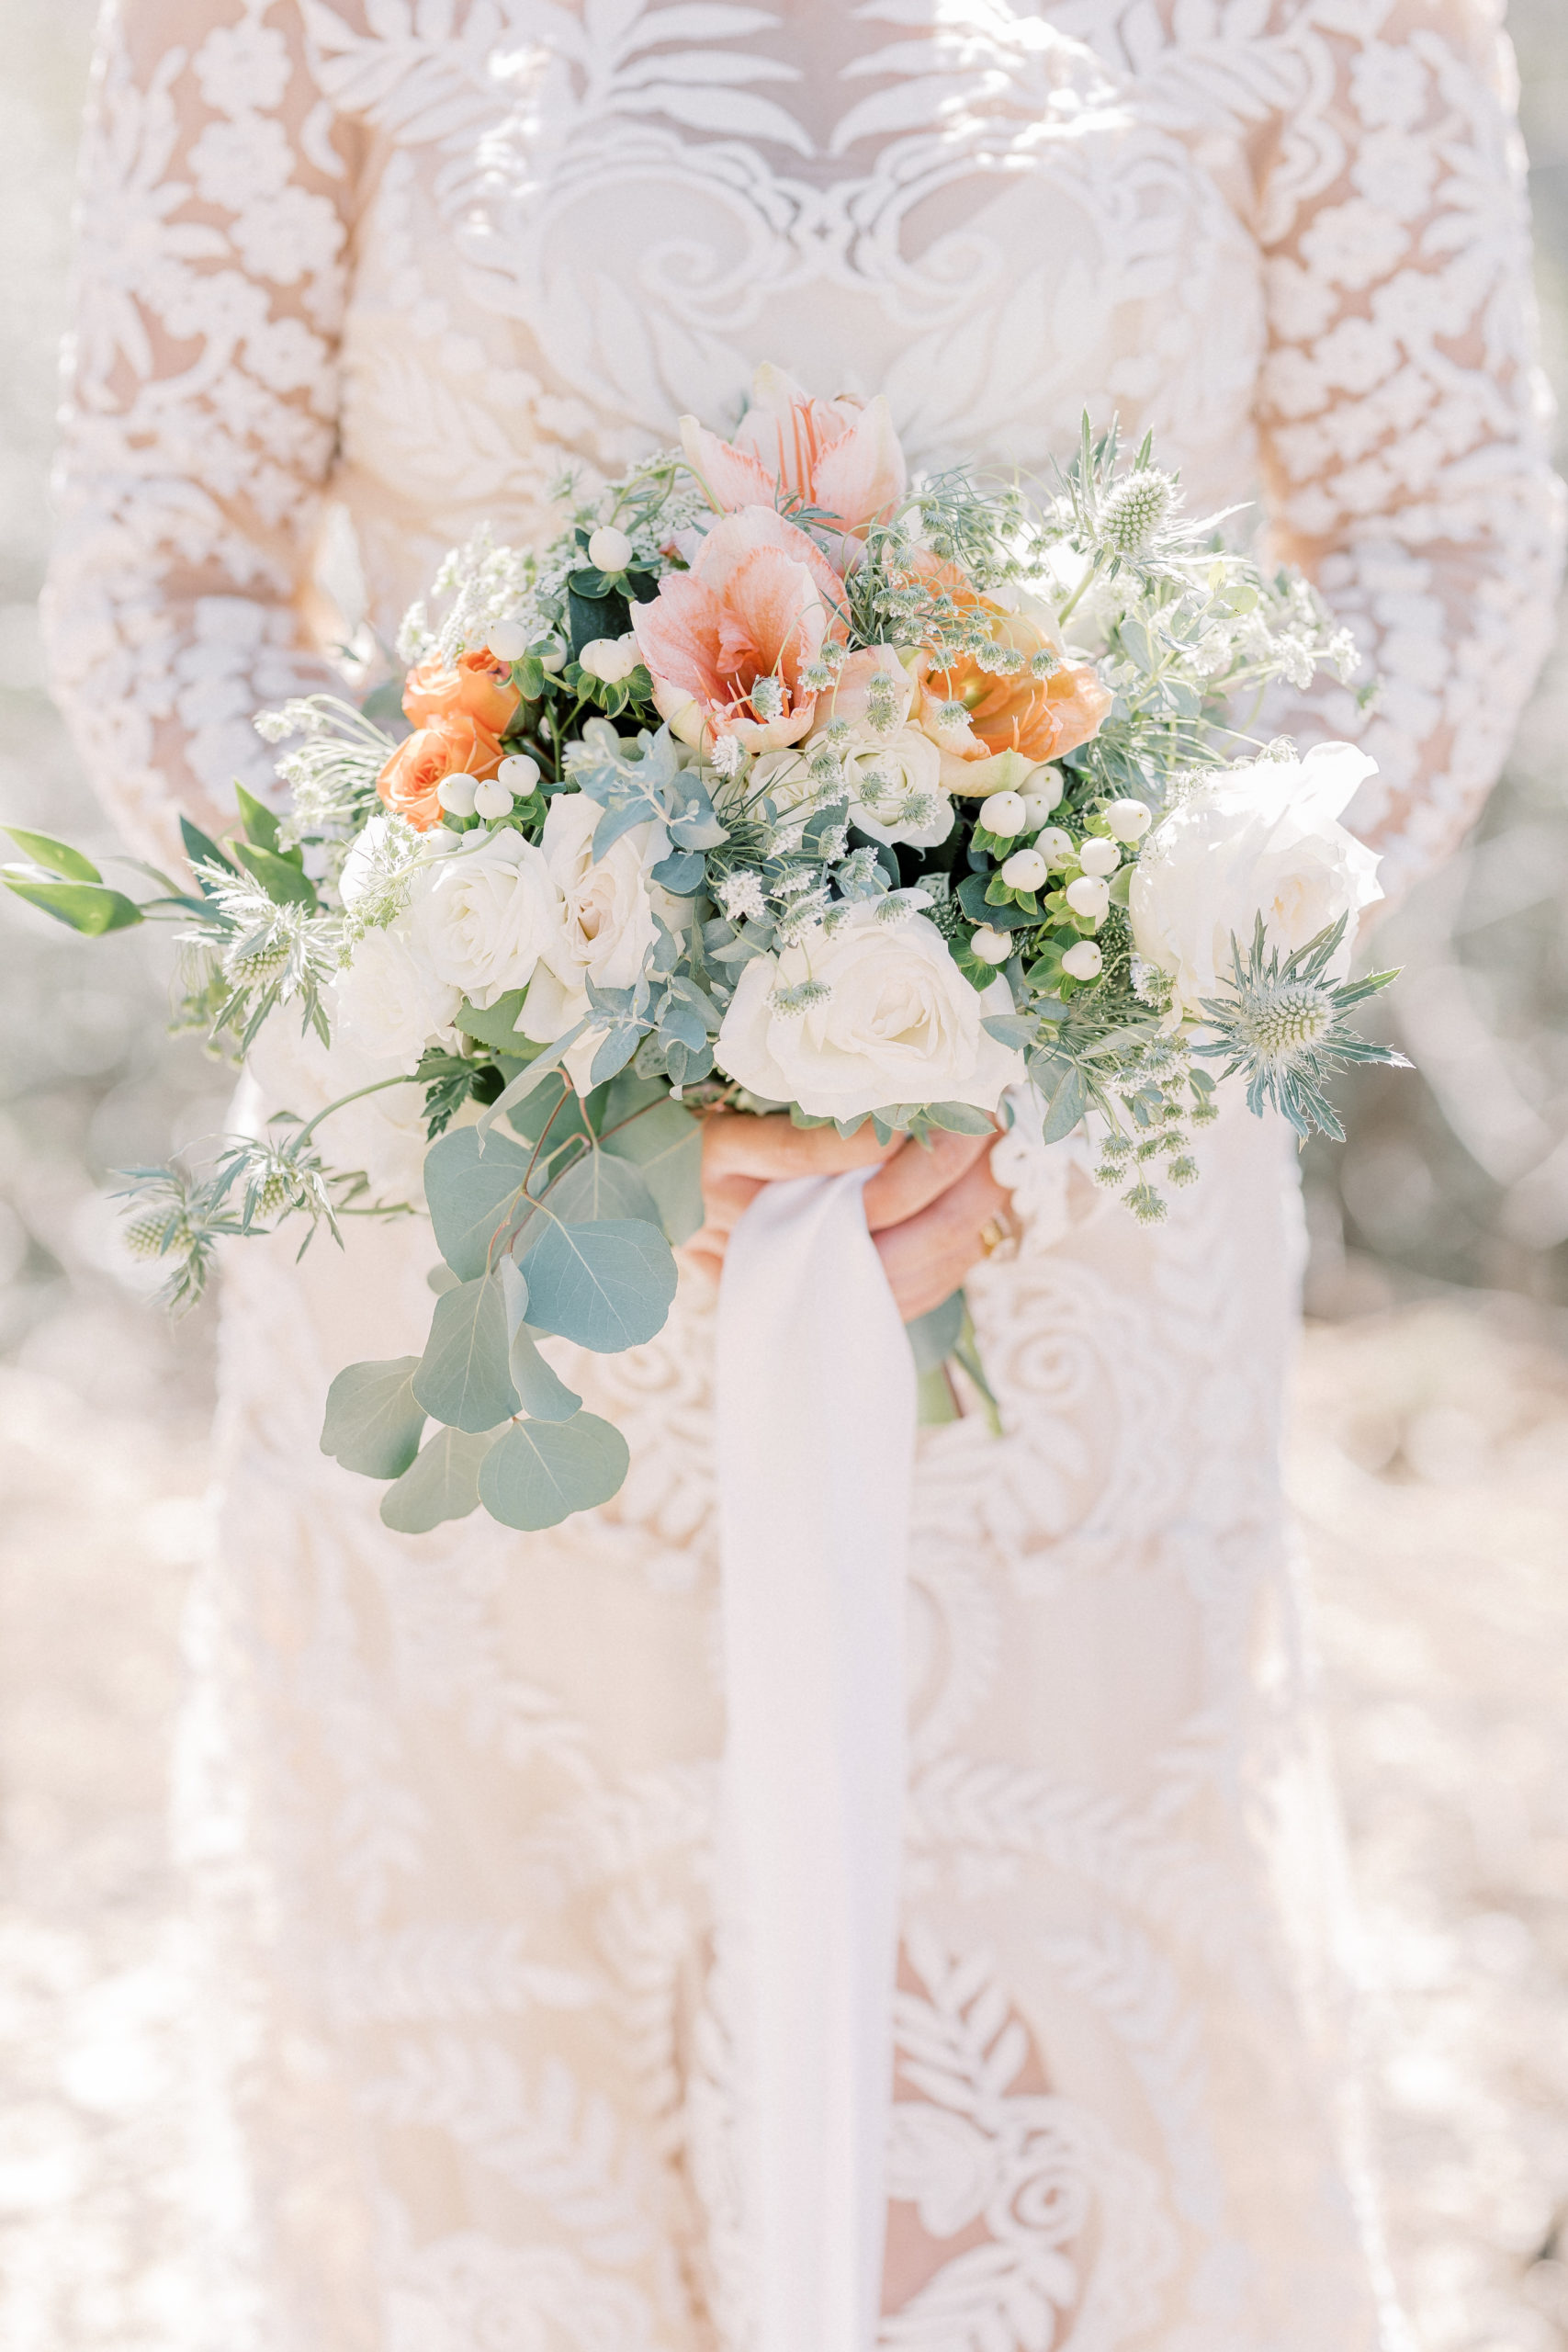 Wedding bouquet with pink, peach and white flowers. Accented with greenery and eucalyptus springs.